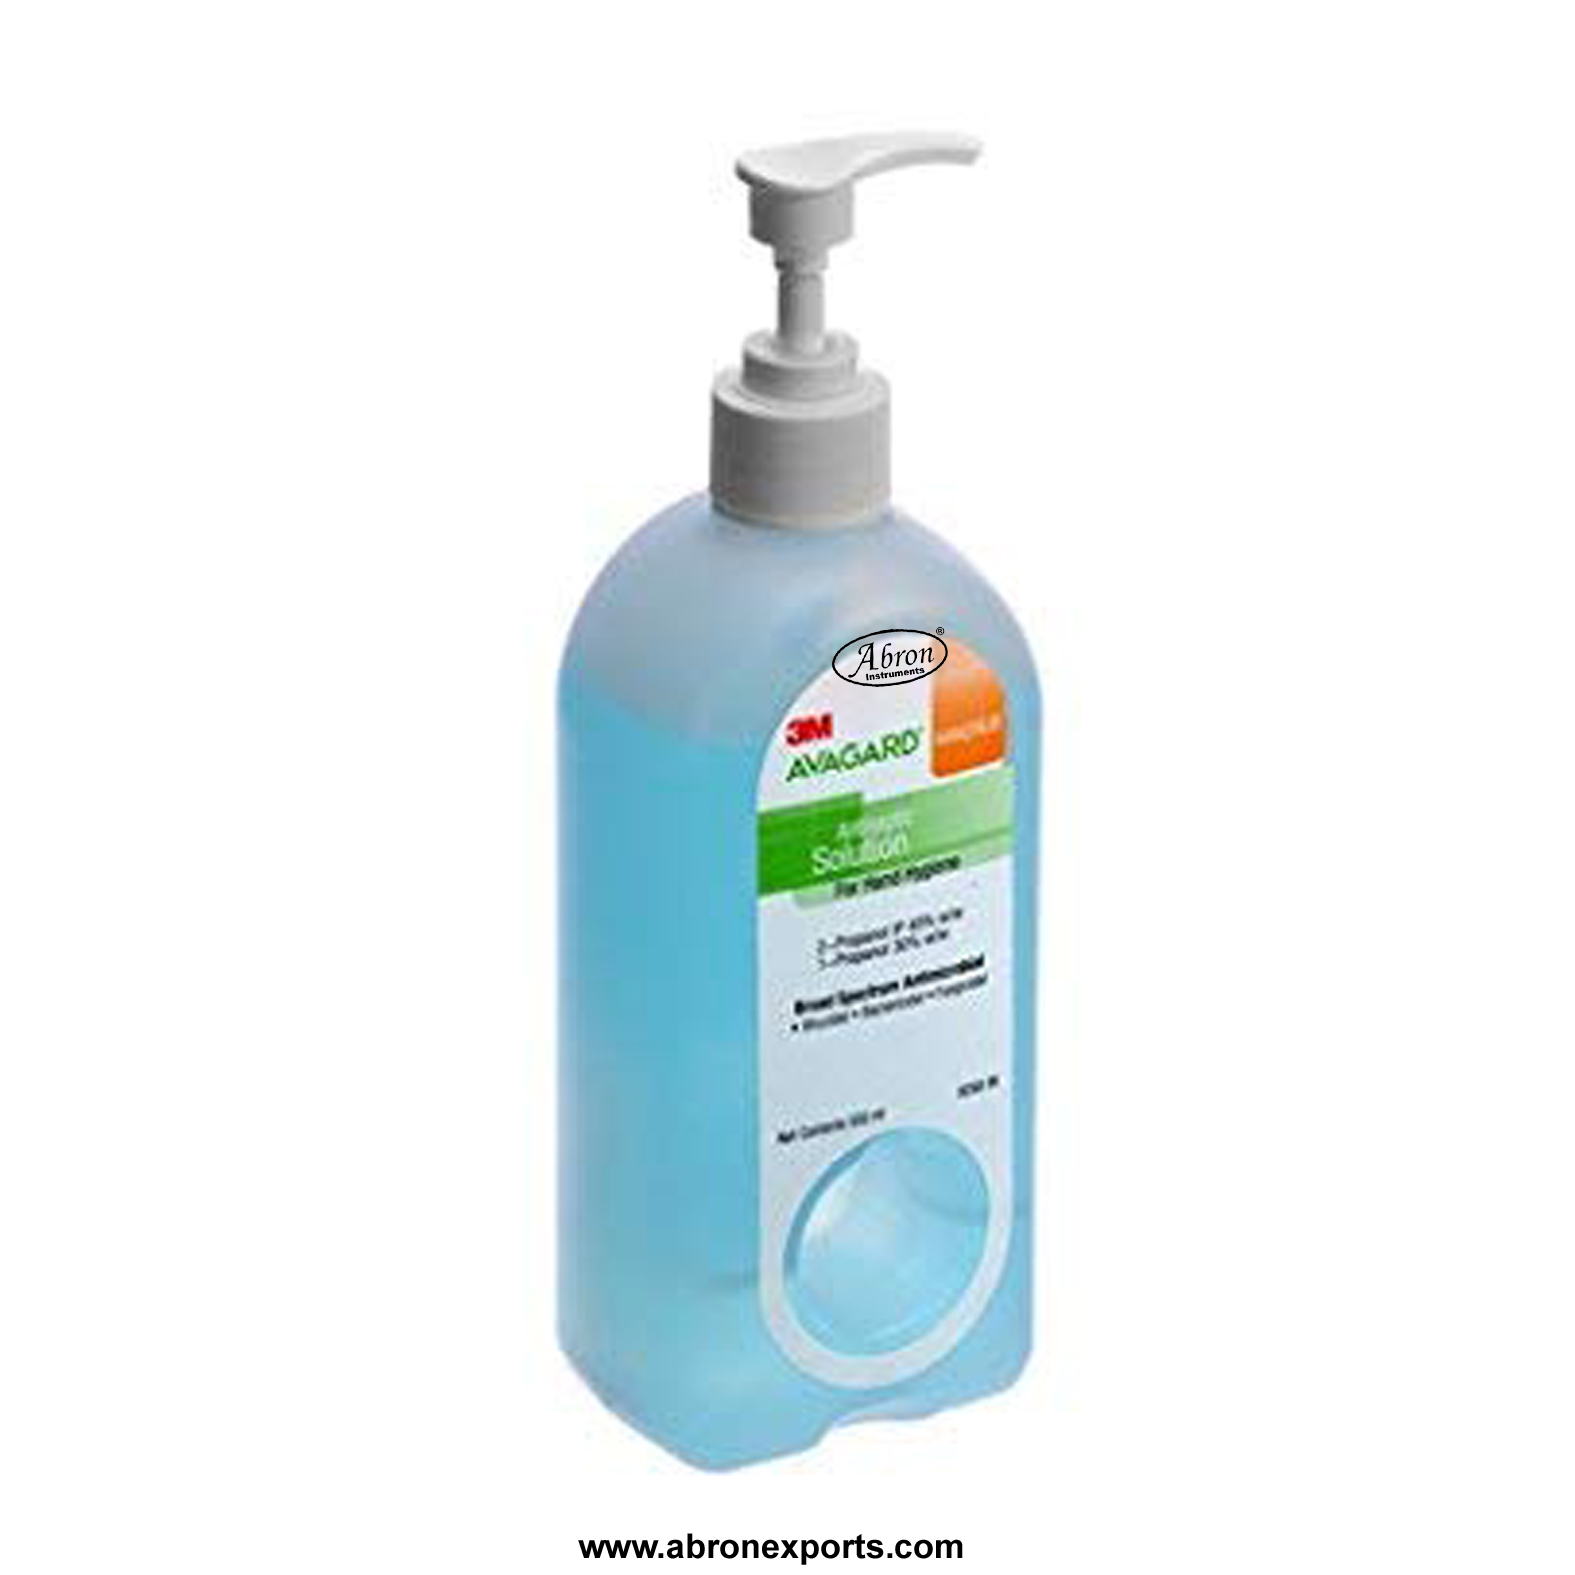 Hand Sanitizer alcohol 100ml based hand rub solution disinfectant abron 